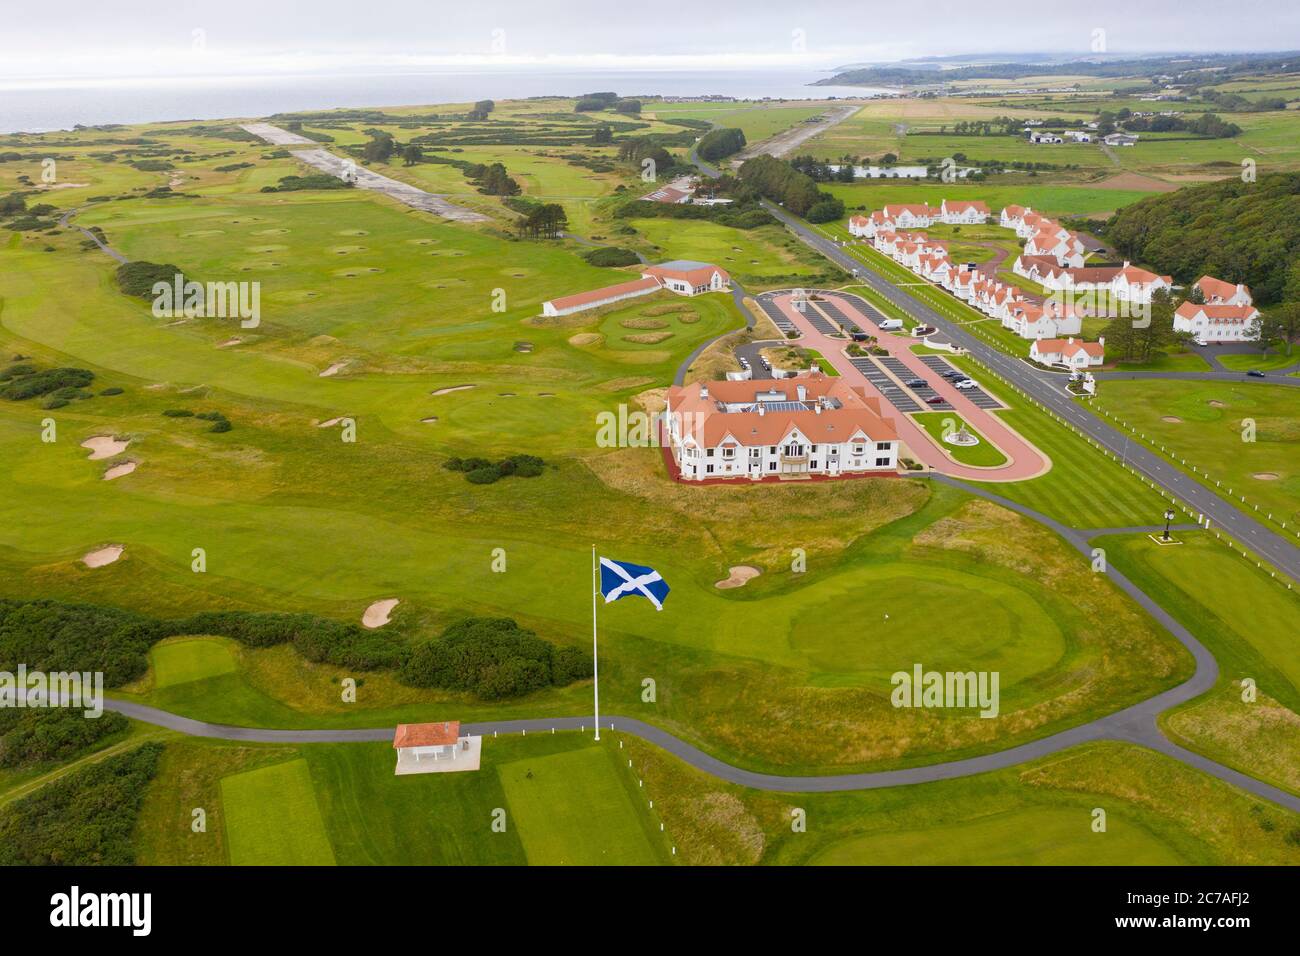 Turnberry, Scotland, UK. 15 July, 2020. General aerial views of Trump Turnberry Golf Club and Hotel on the Ayrshire coast. Trump Turnberry is planning to expand the resort by building hundreds of luxury private homes, apartments and retirement villas and transforming the area into an exclusive retirement golf resort. Iain Masterton/Alamy Live News Stock Photo